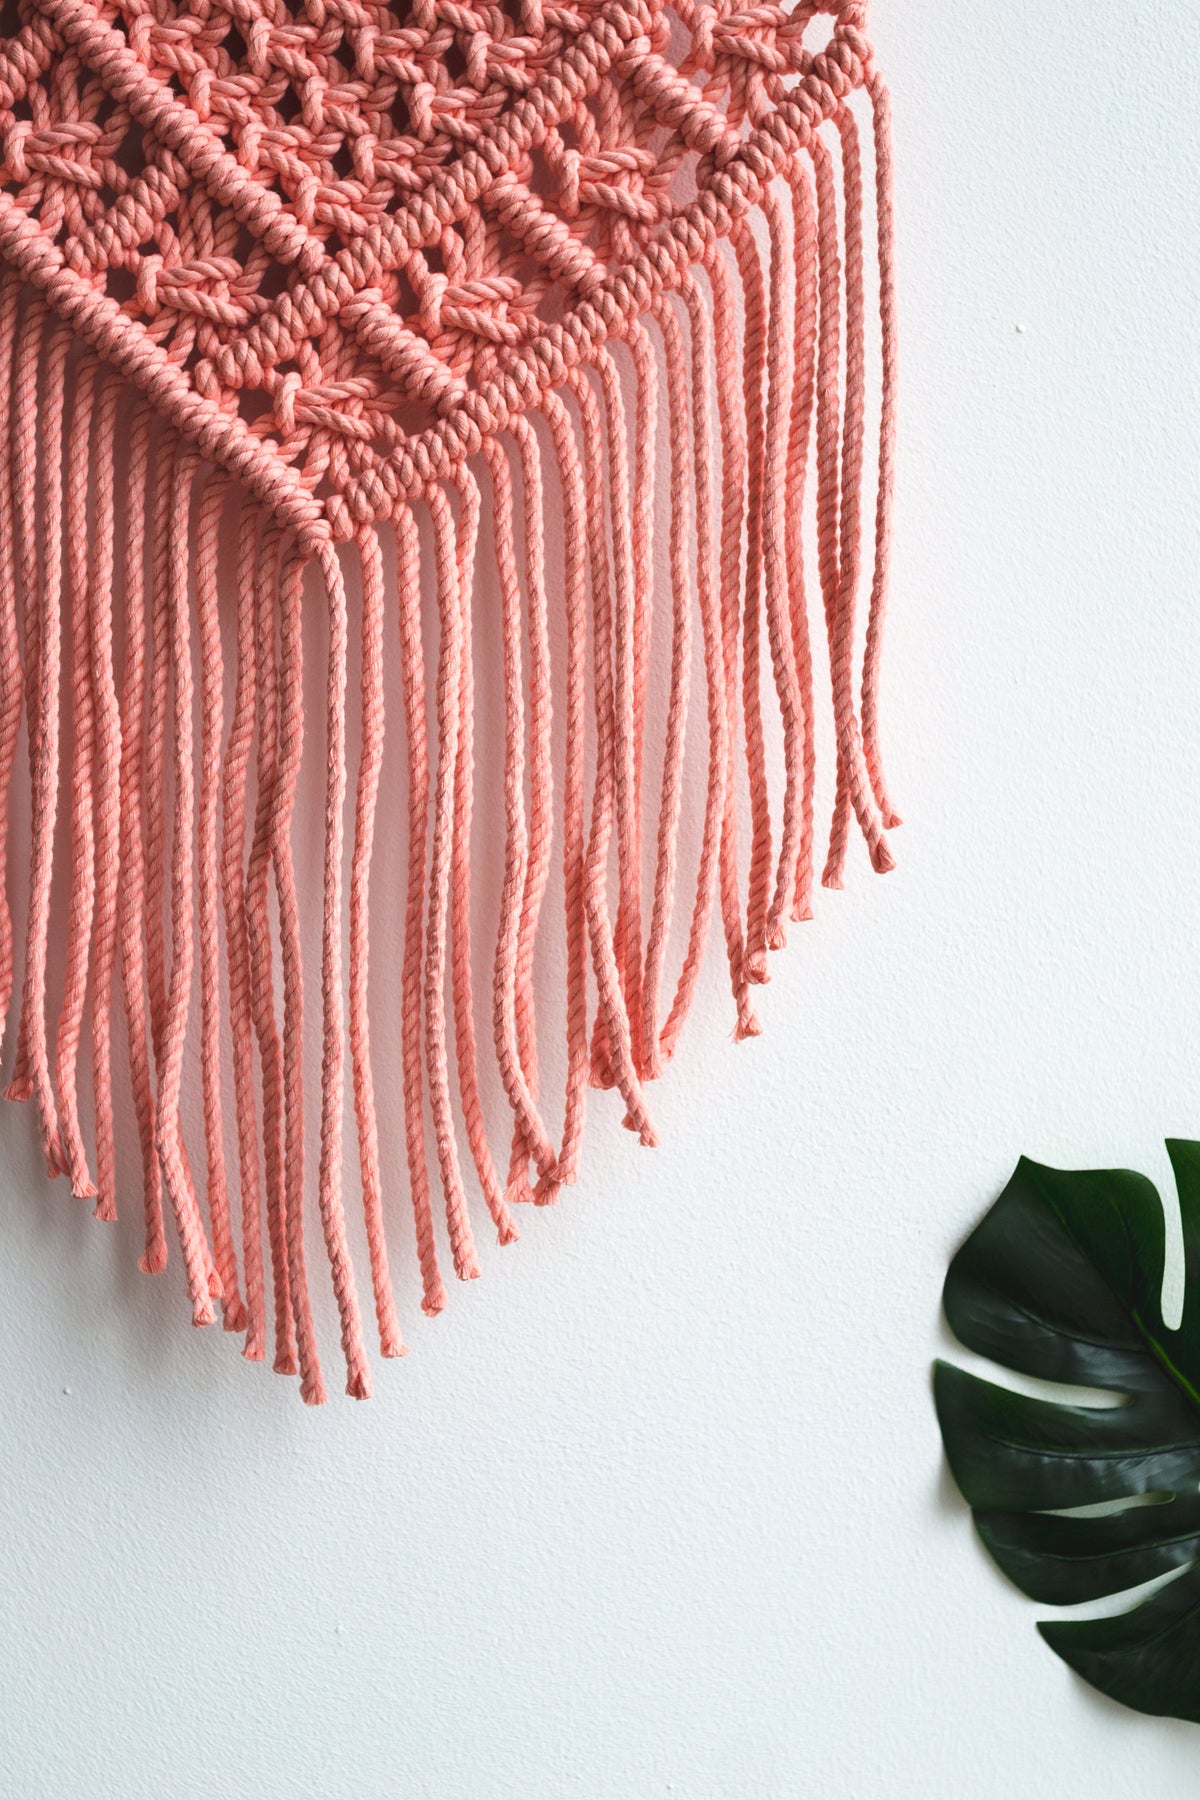 Macrame wall hanging / Nursery decor /  Available in 12 different colors.